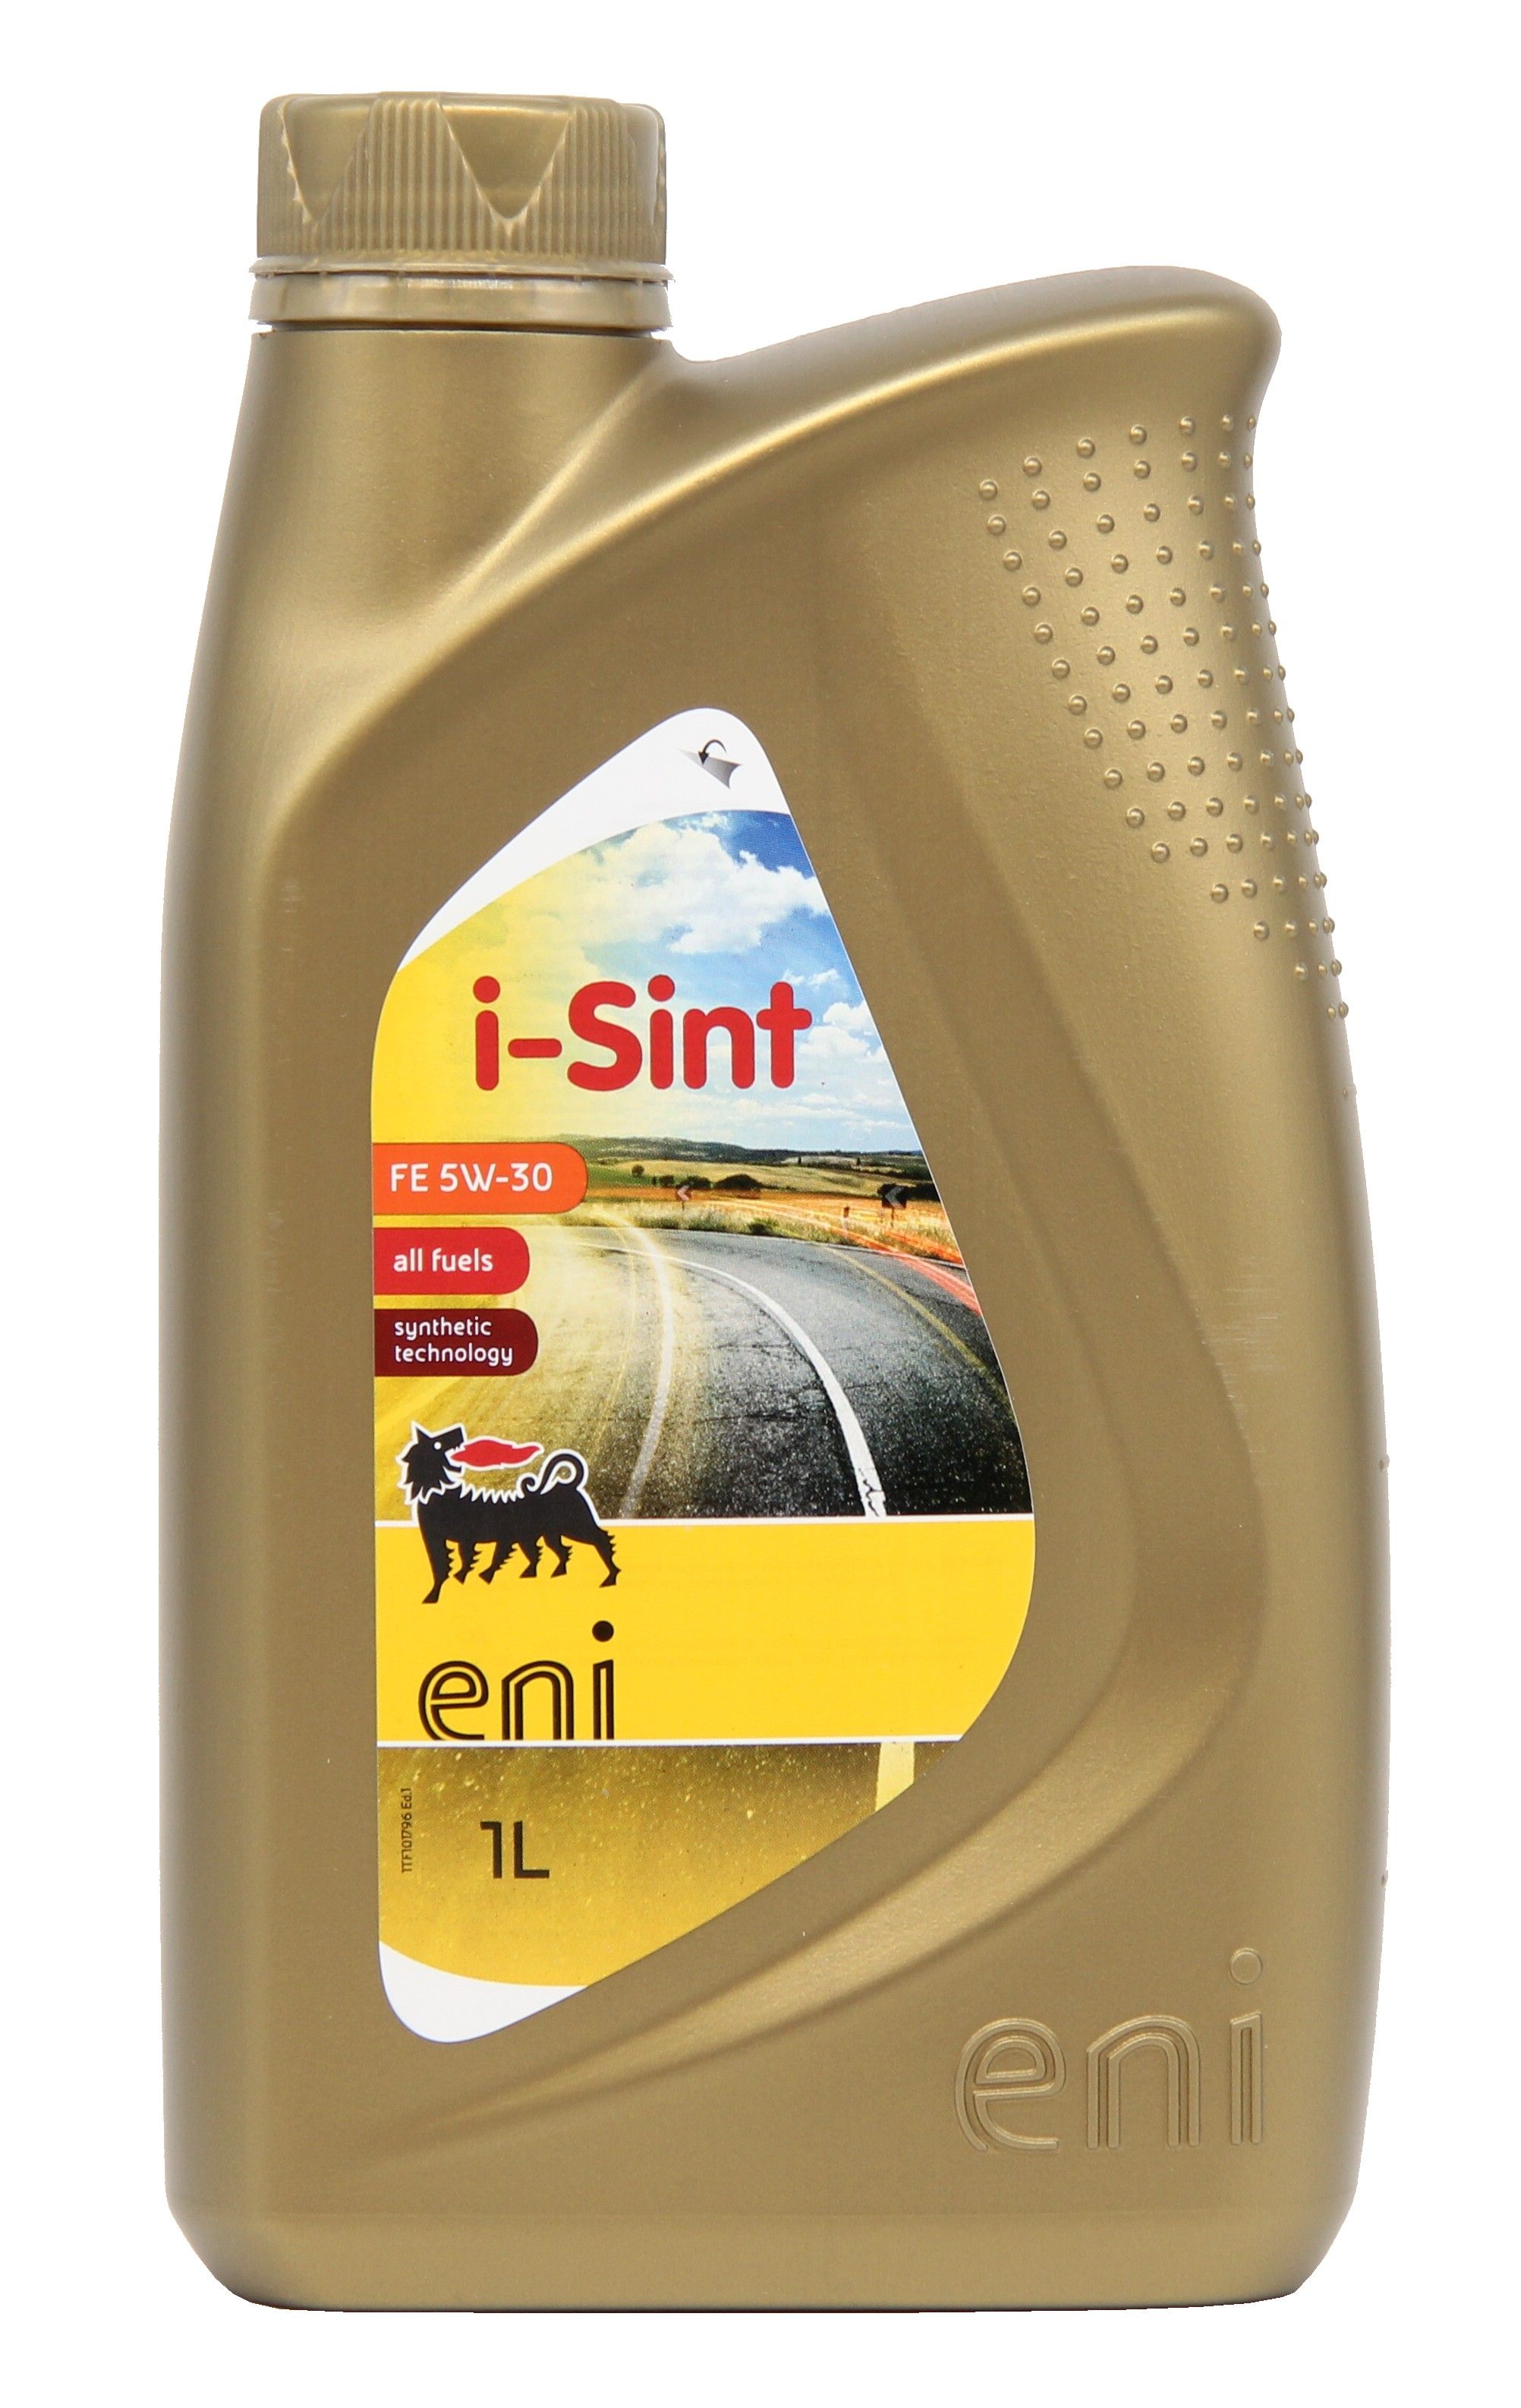 Масло eni 5w30. Моторное масло Eni i-Sint 5w30. Масло i Sint 5w 30. Eni i-Sint 5w-30. Моторное масло Eni 10w 40.